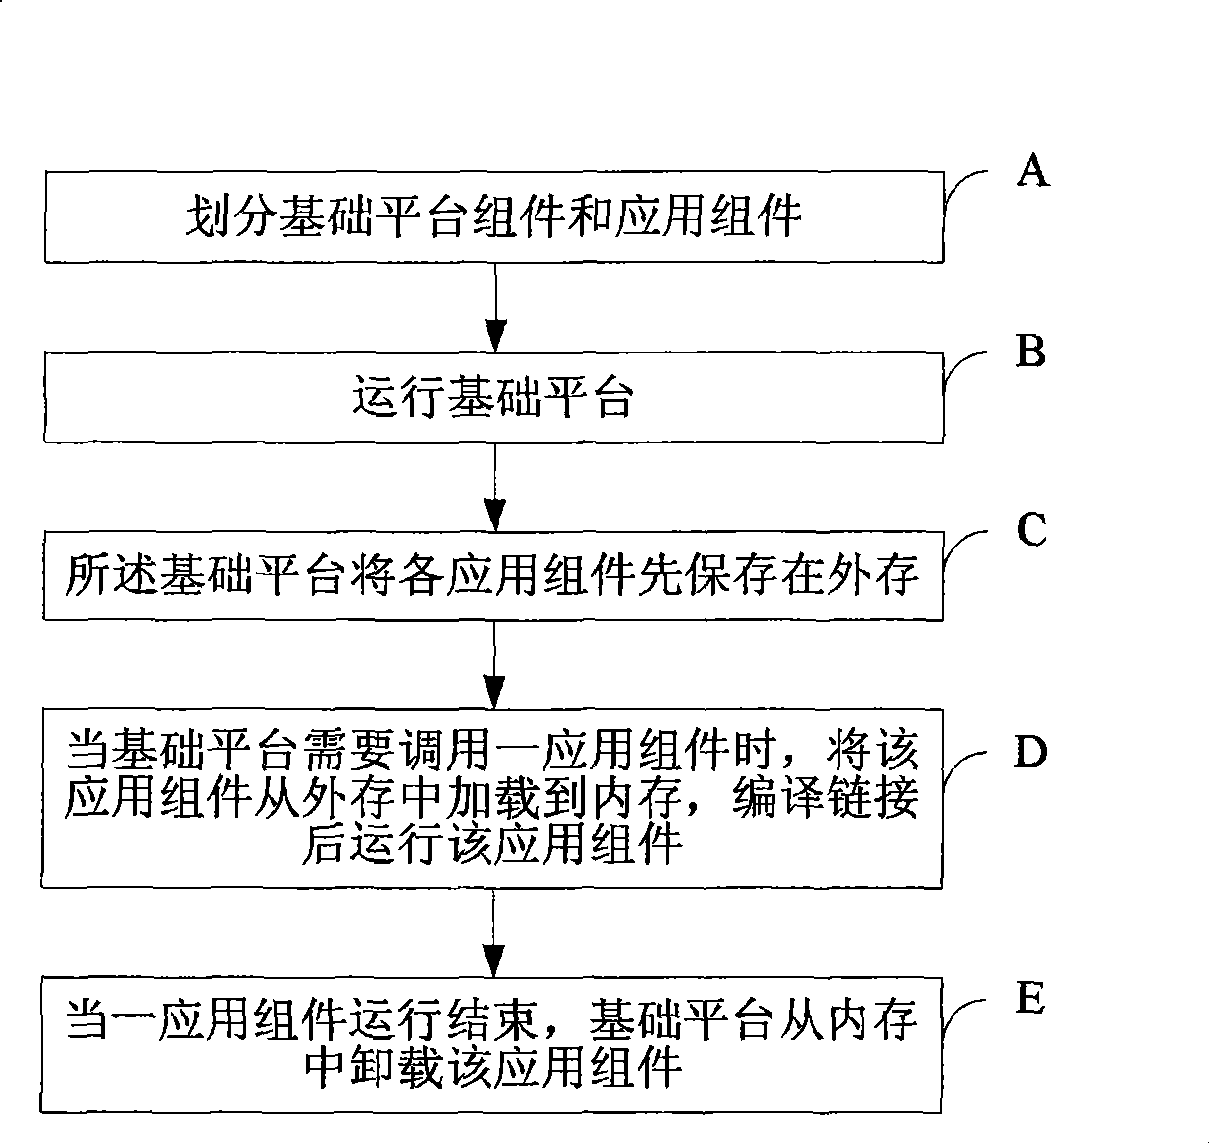 Method and apparatus for implementing dynamic loading in embedded real-time operating system